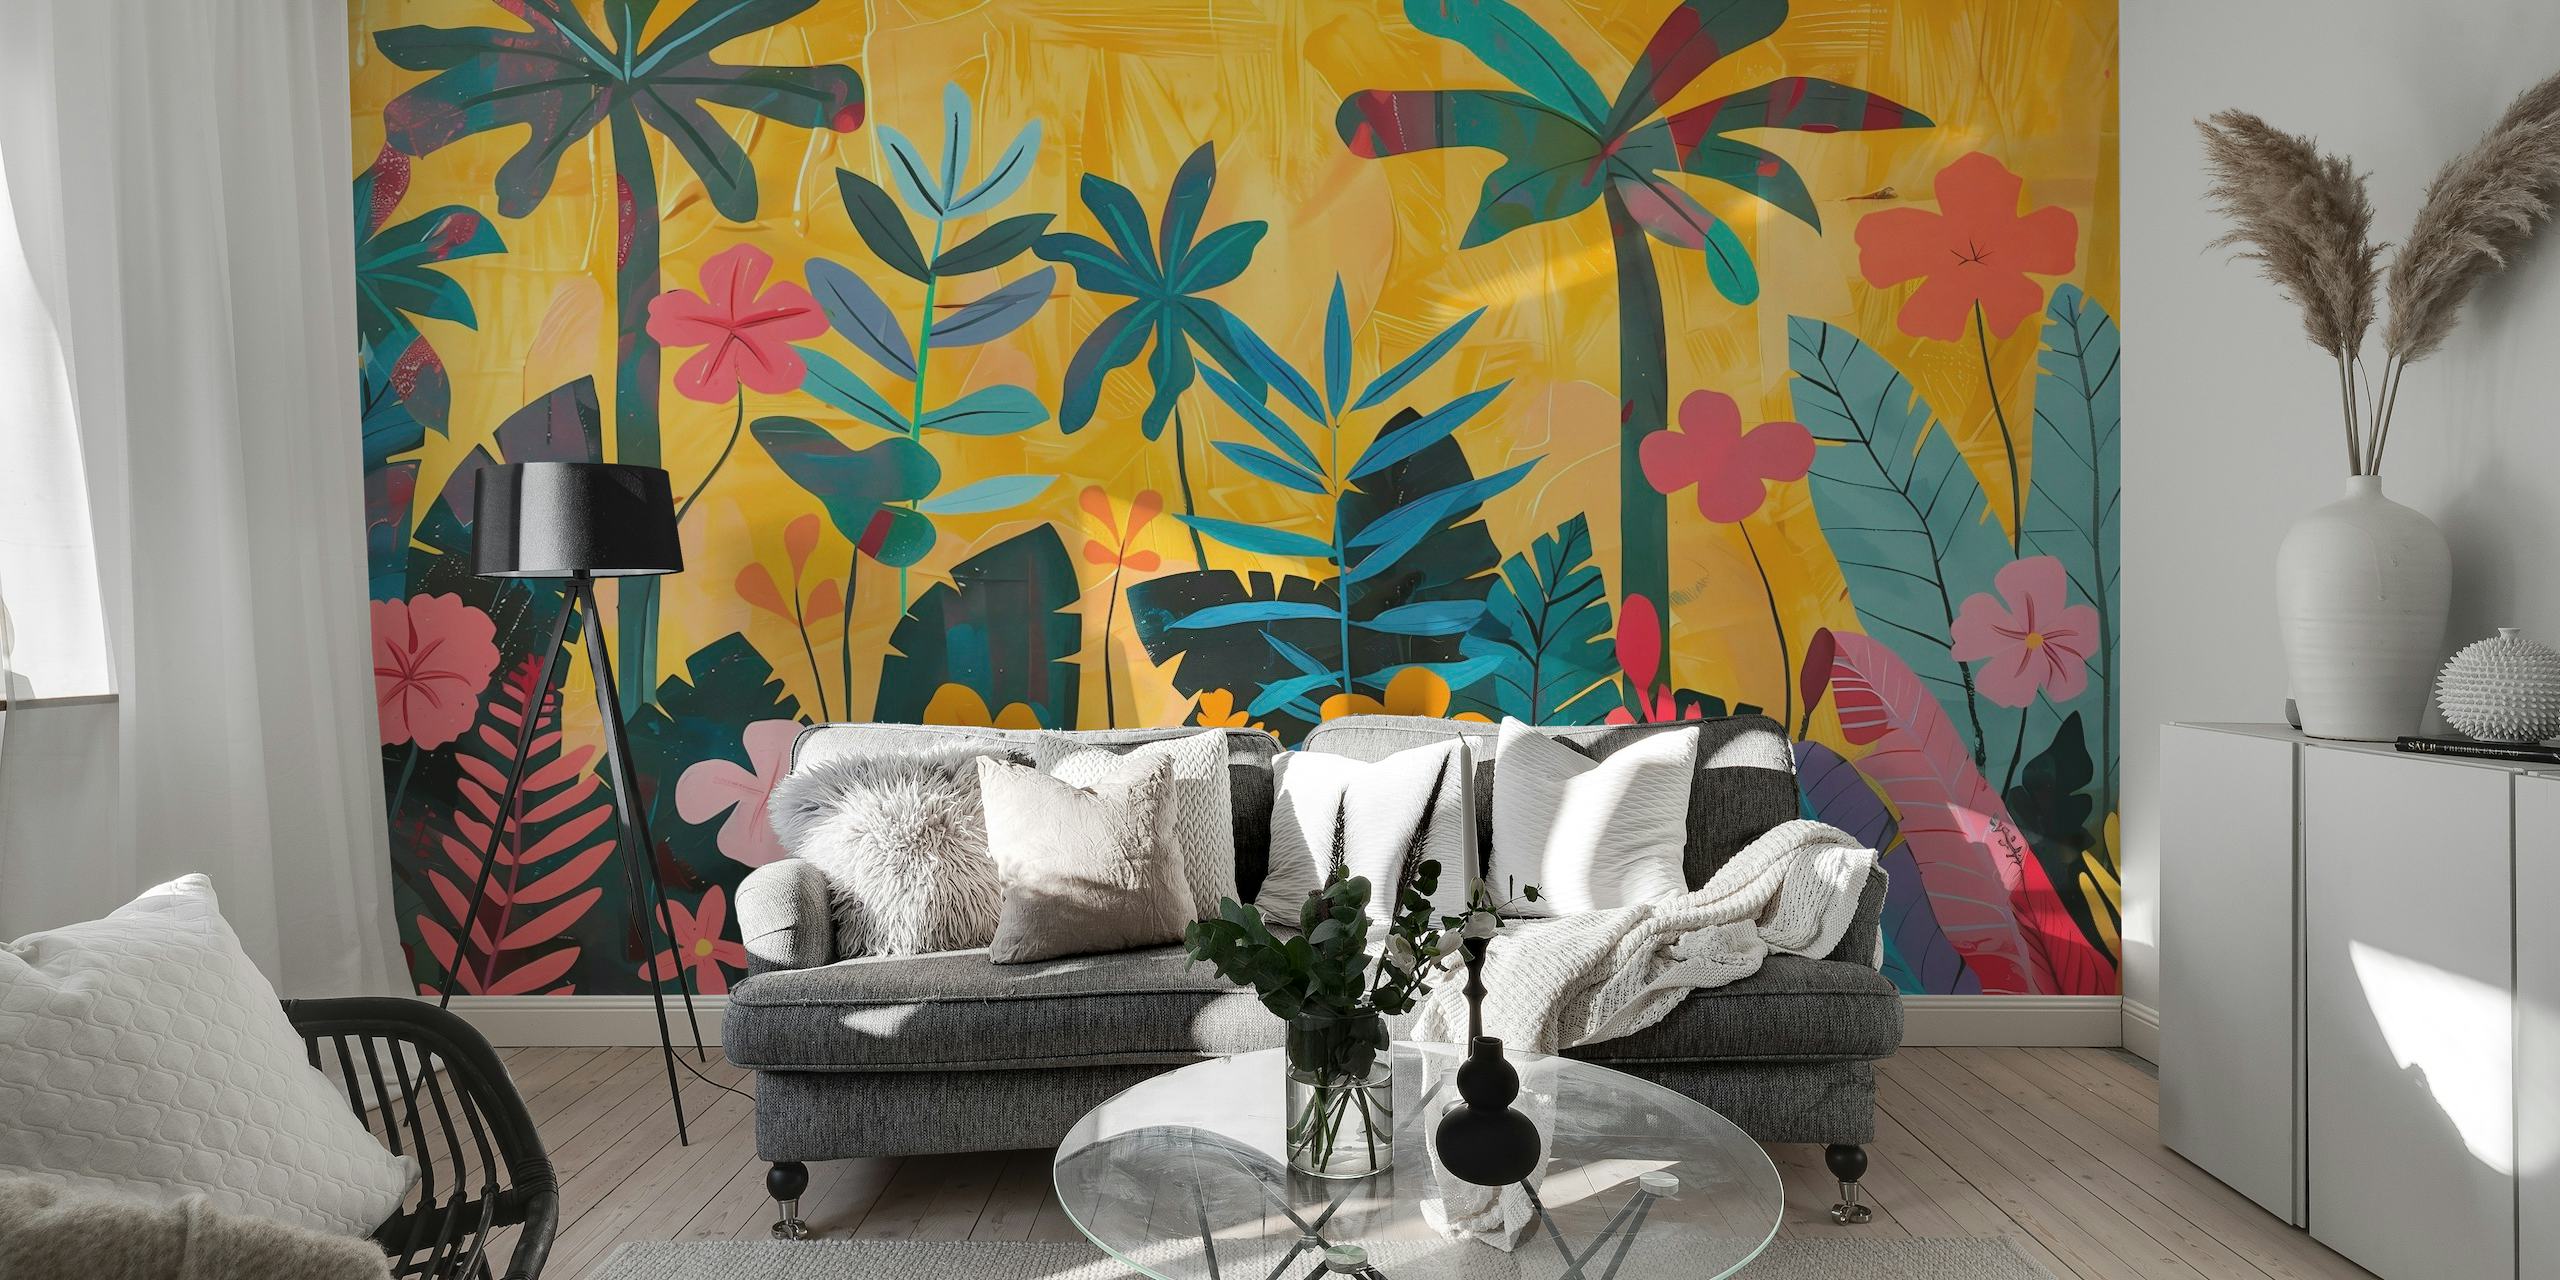 Colorful tropical garden wall mural with palm trees and vibrant plants